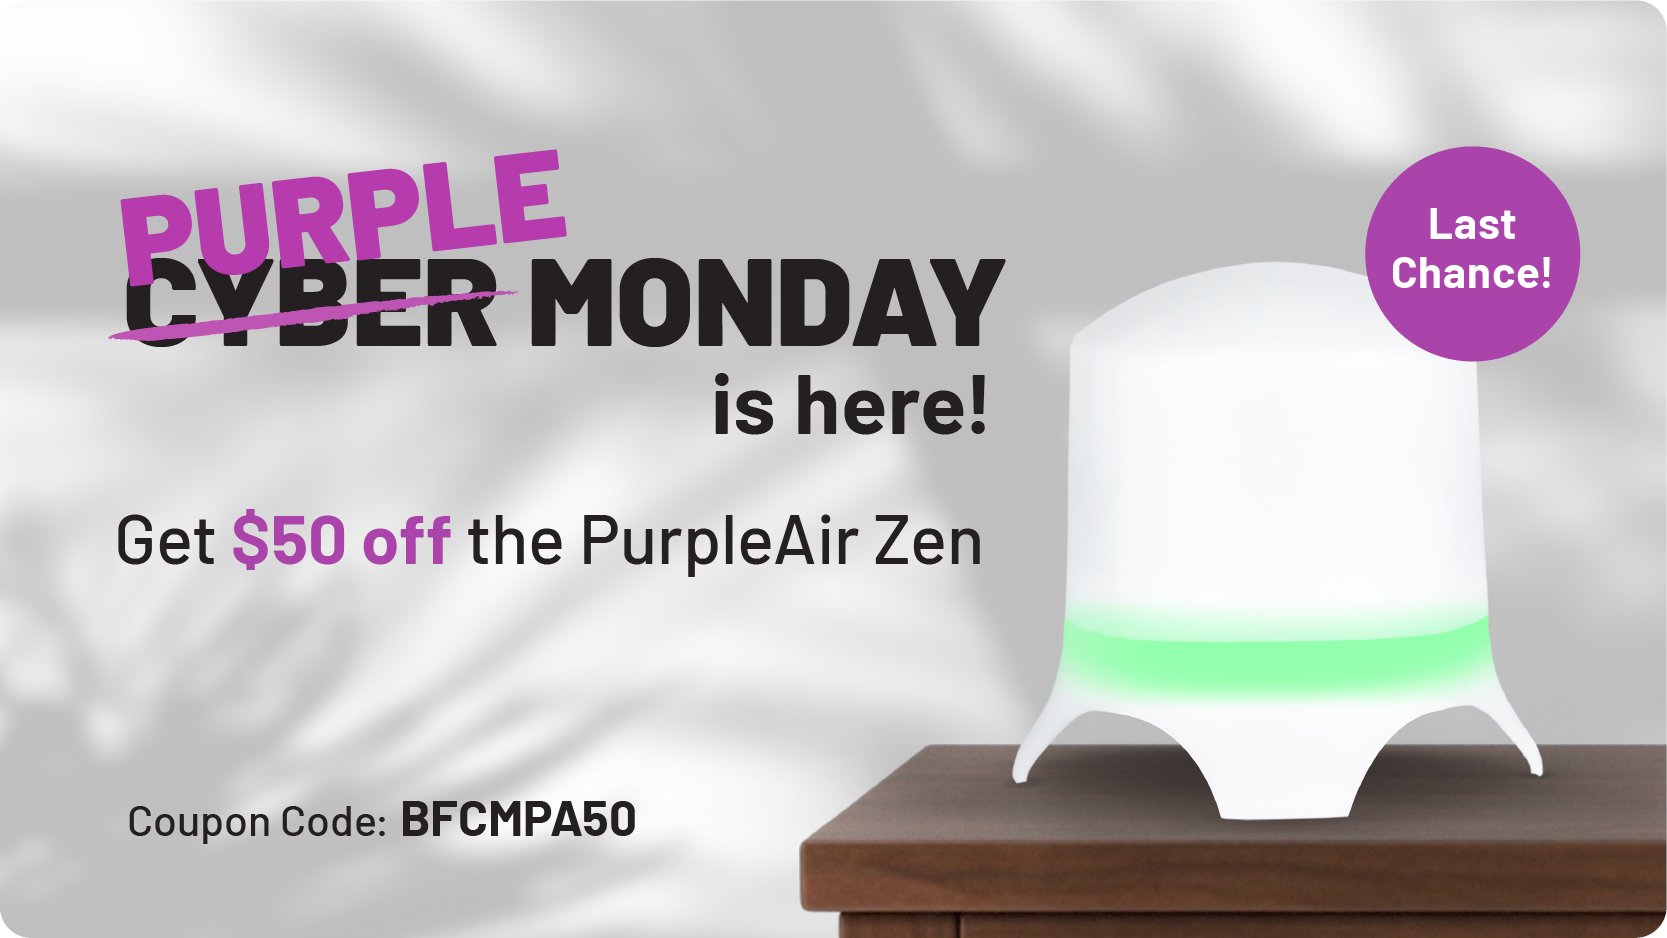 PurpleAir - Air Quality Monitors on X: Last chance to get the PurpleAir  Zen #AirQualityMonitor with $50 off!  The offer ends  tonight at midnight! #AirQuality #PM25 #AirPollution #AQI #CleanAir   /